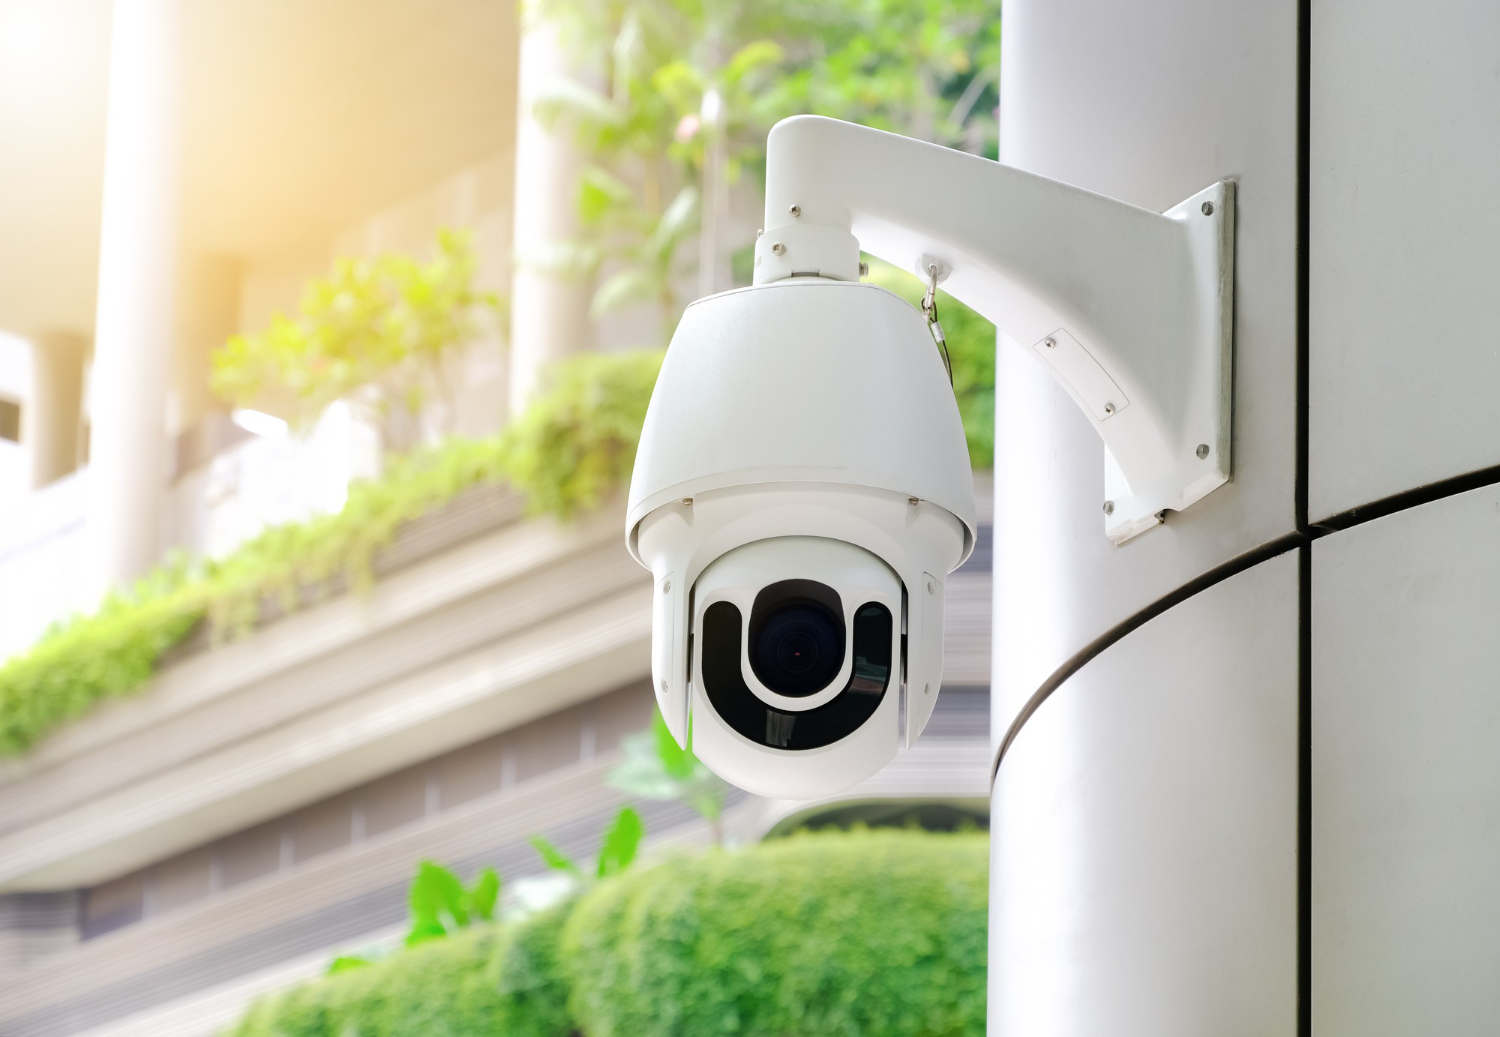 16 Important Facts You Need to Know Before Purchasing a Wireless Home Security Cameras